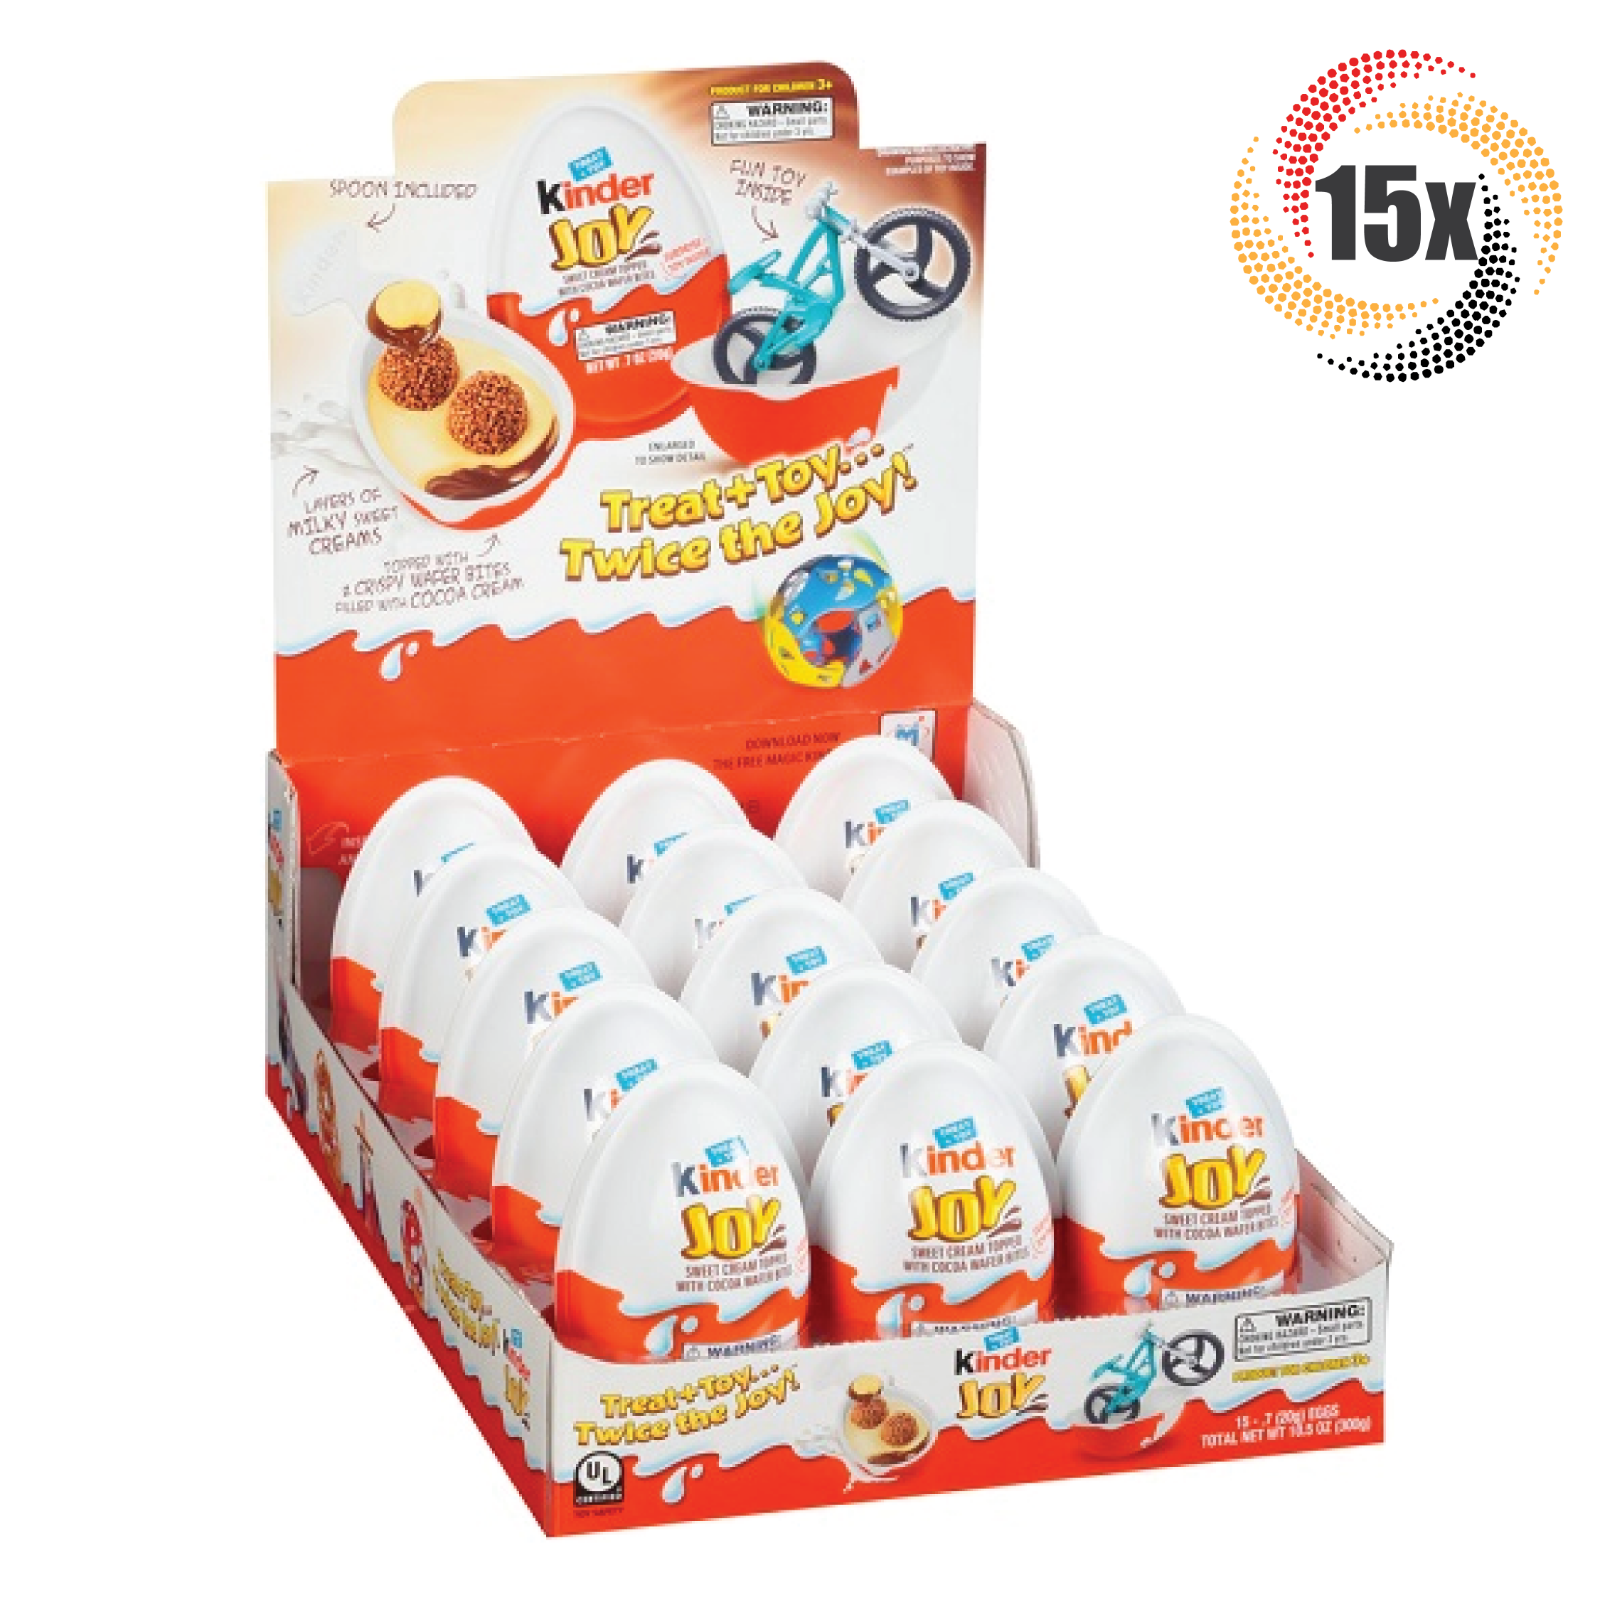 Full Box 15x Eggs Kinder Joy Sweet Cream Cocoa Wafer Bites Candy With Toy .7oz - $33.55